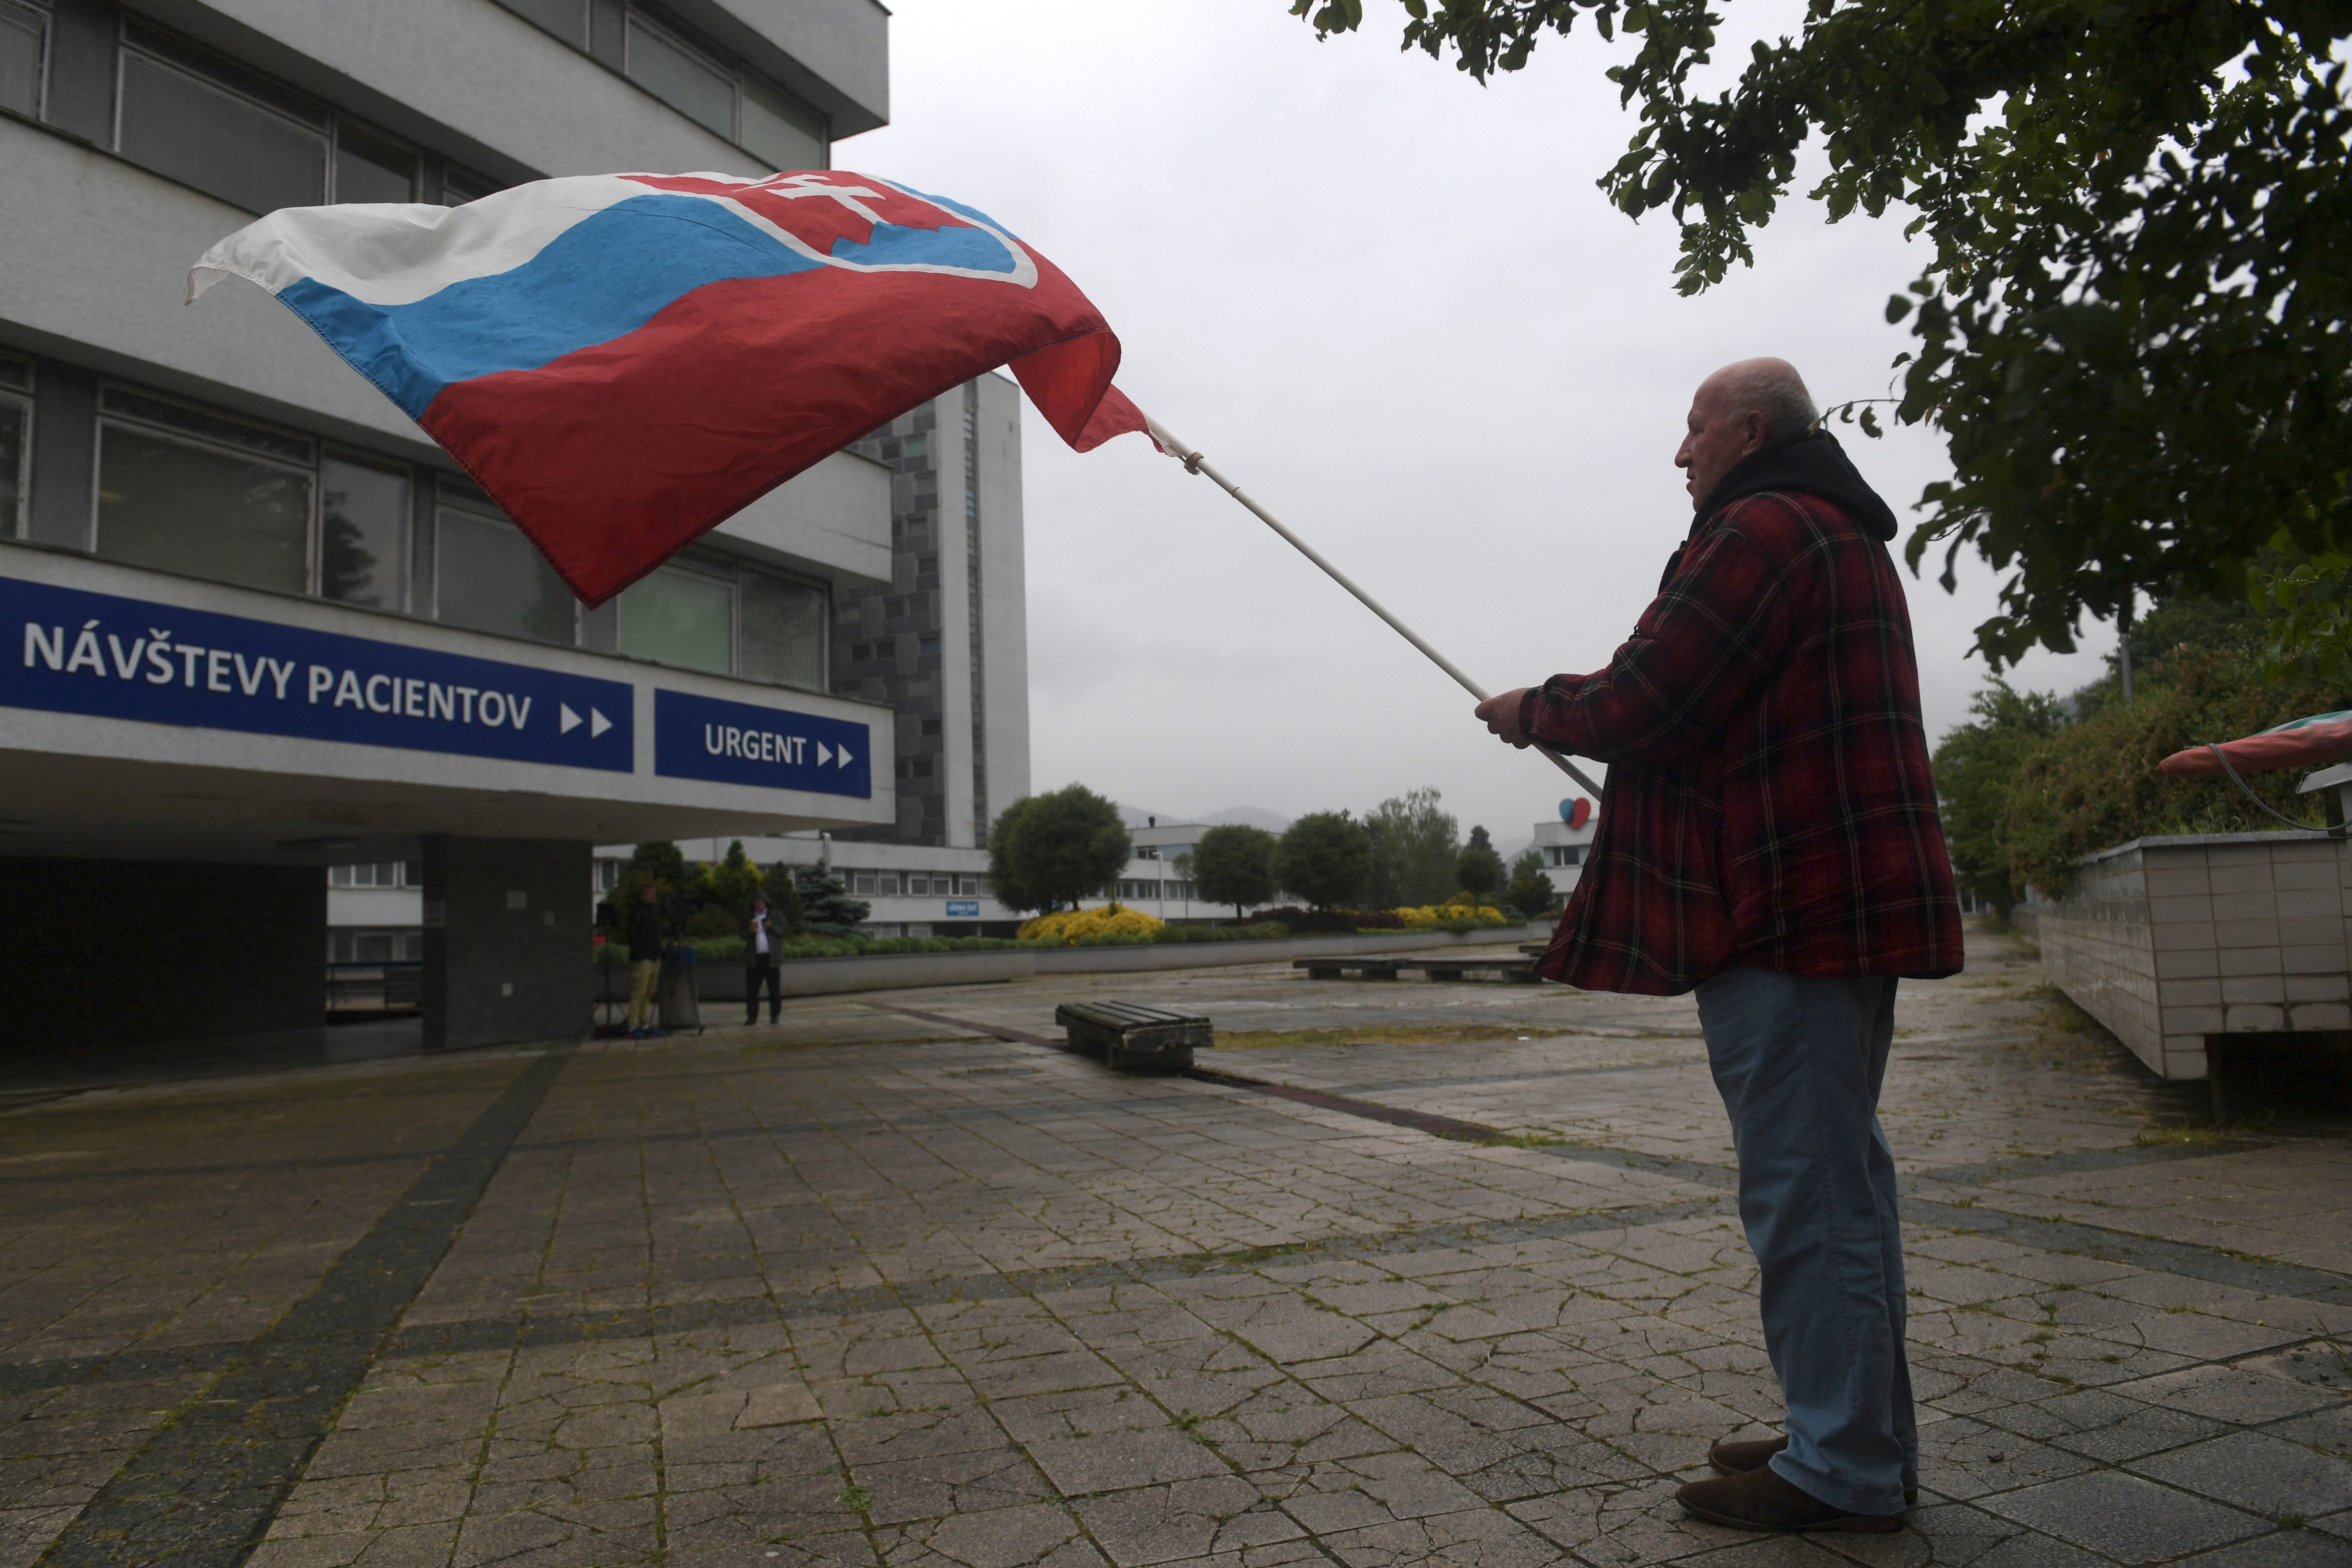 A man waves the Slovakian flag outside the hospital in Banska Bystrica where Mr Fico is being treated